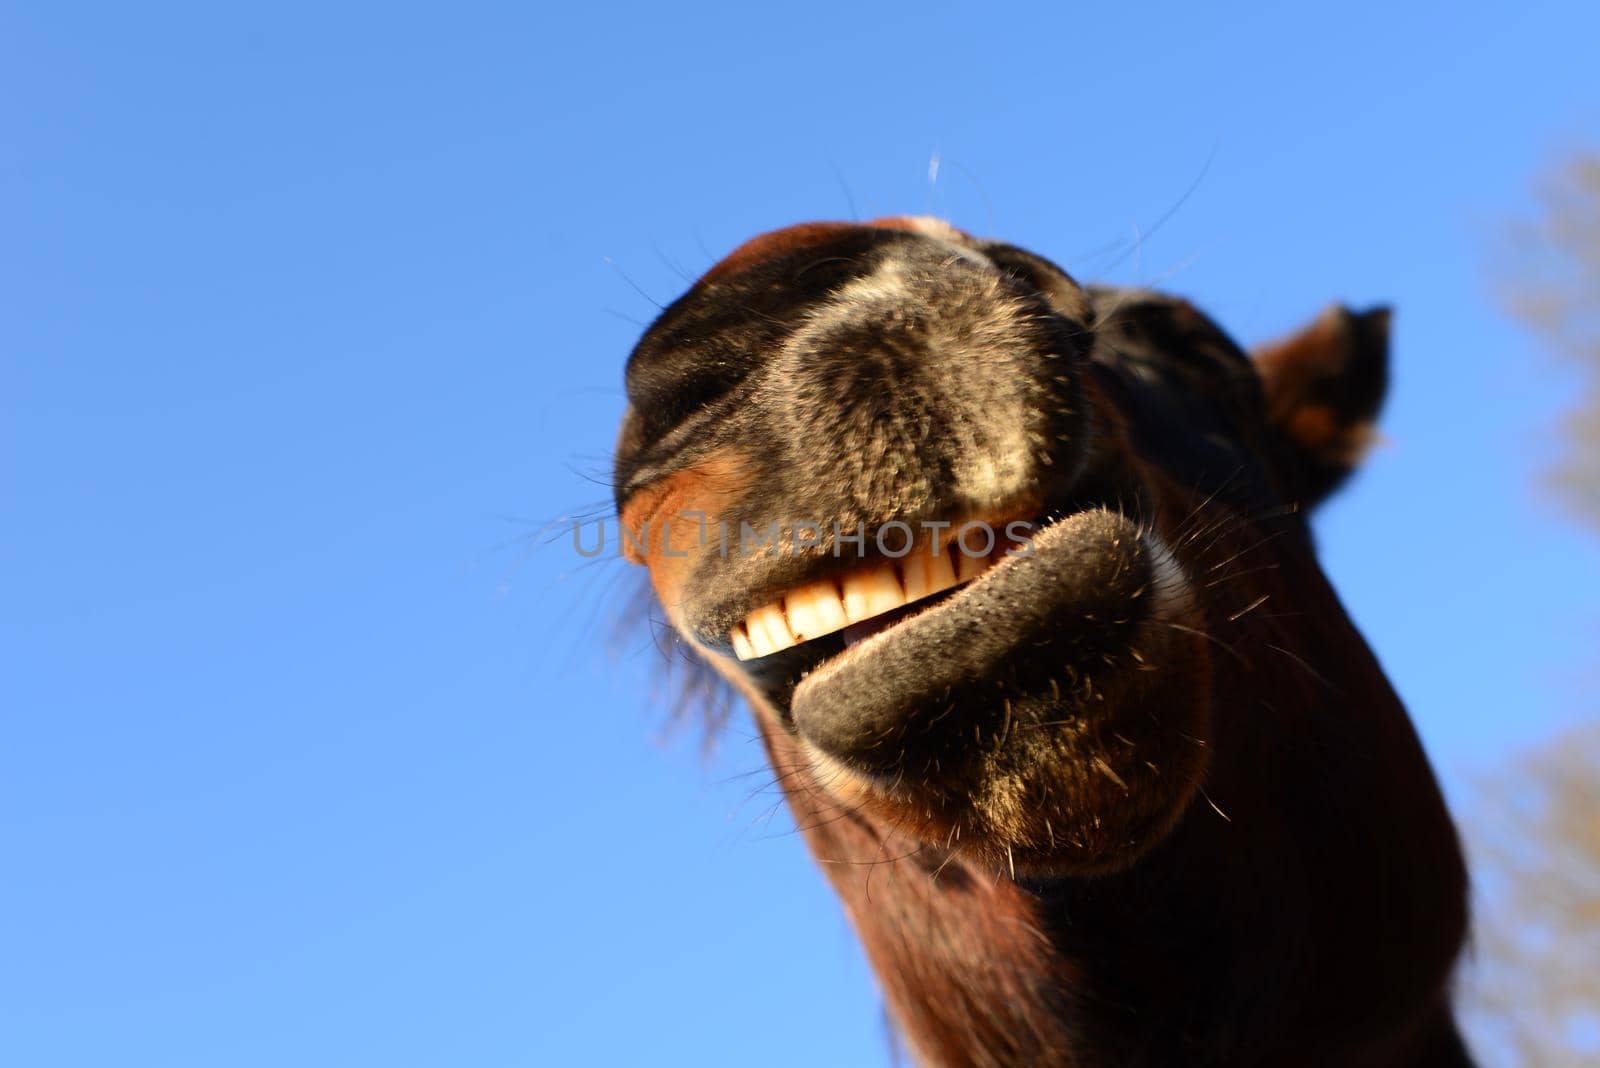 Open mouth of a brown horse from below against ablue sky as a close up